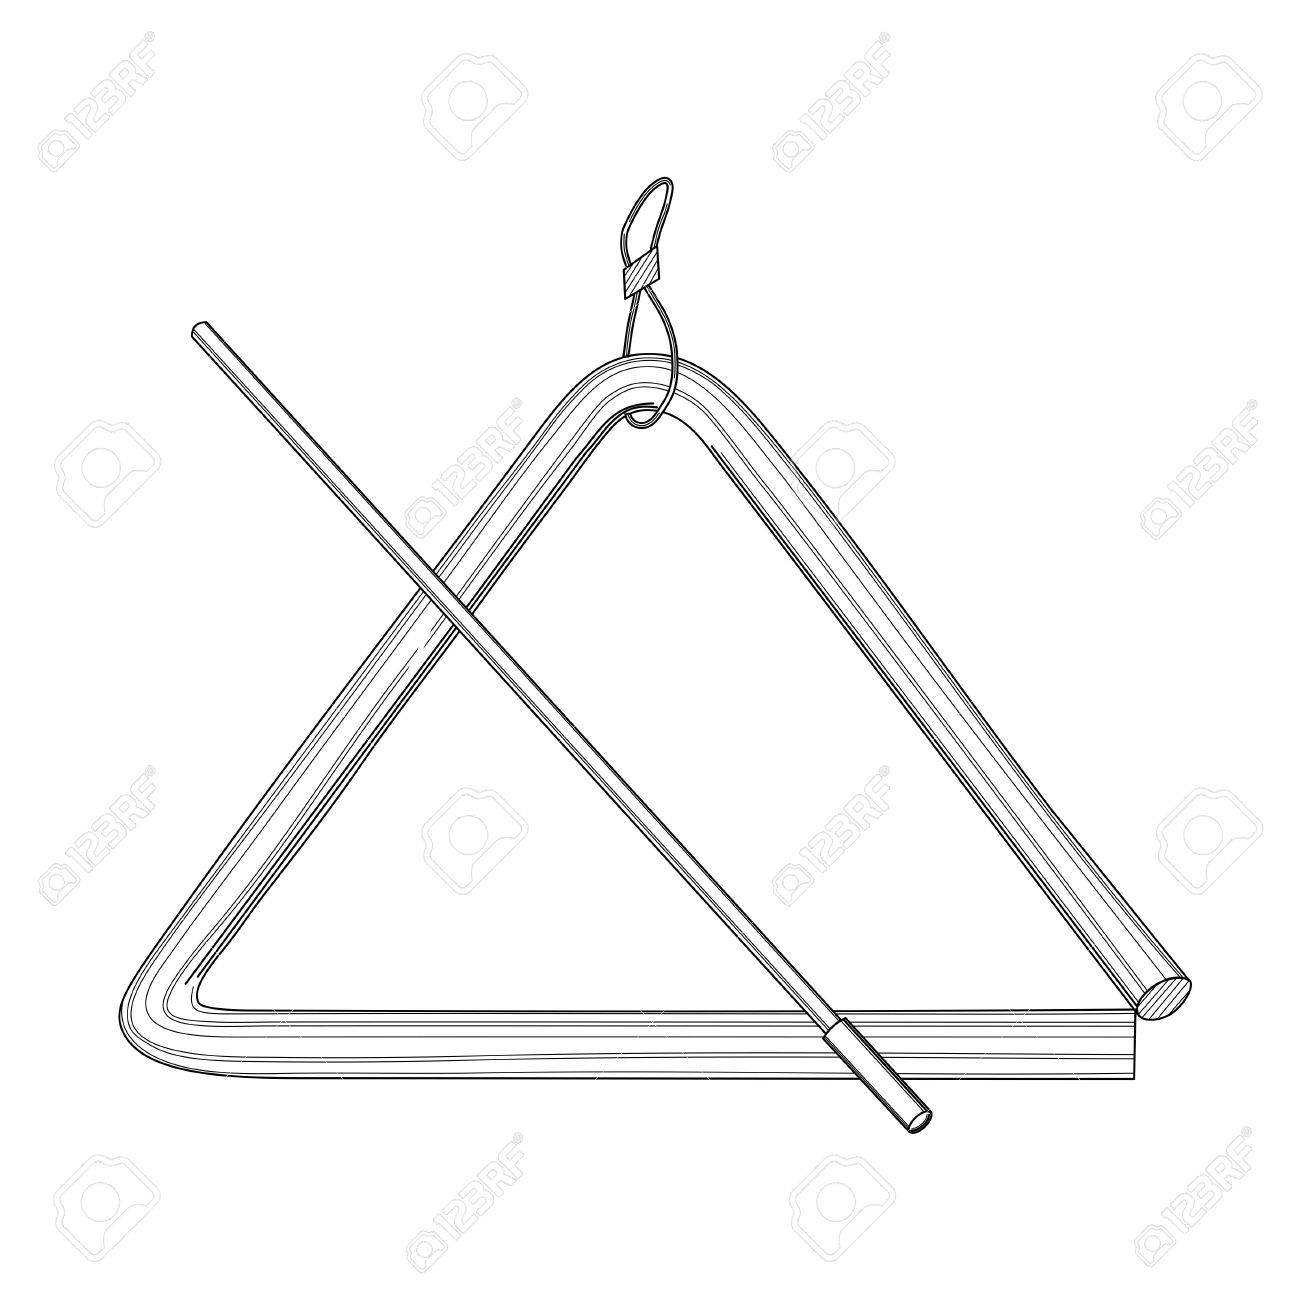 Triangle instrument clipart black and white